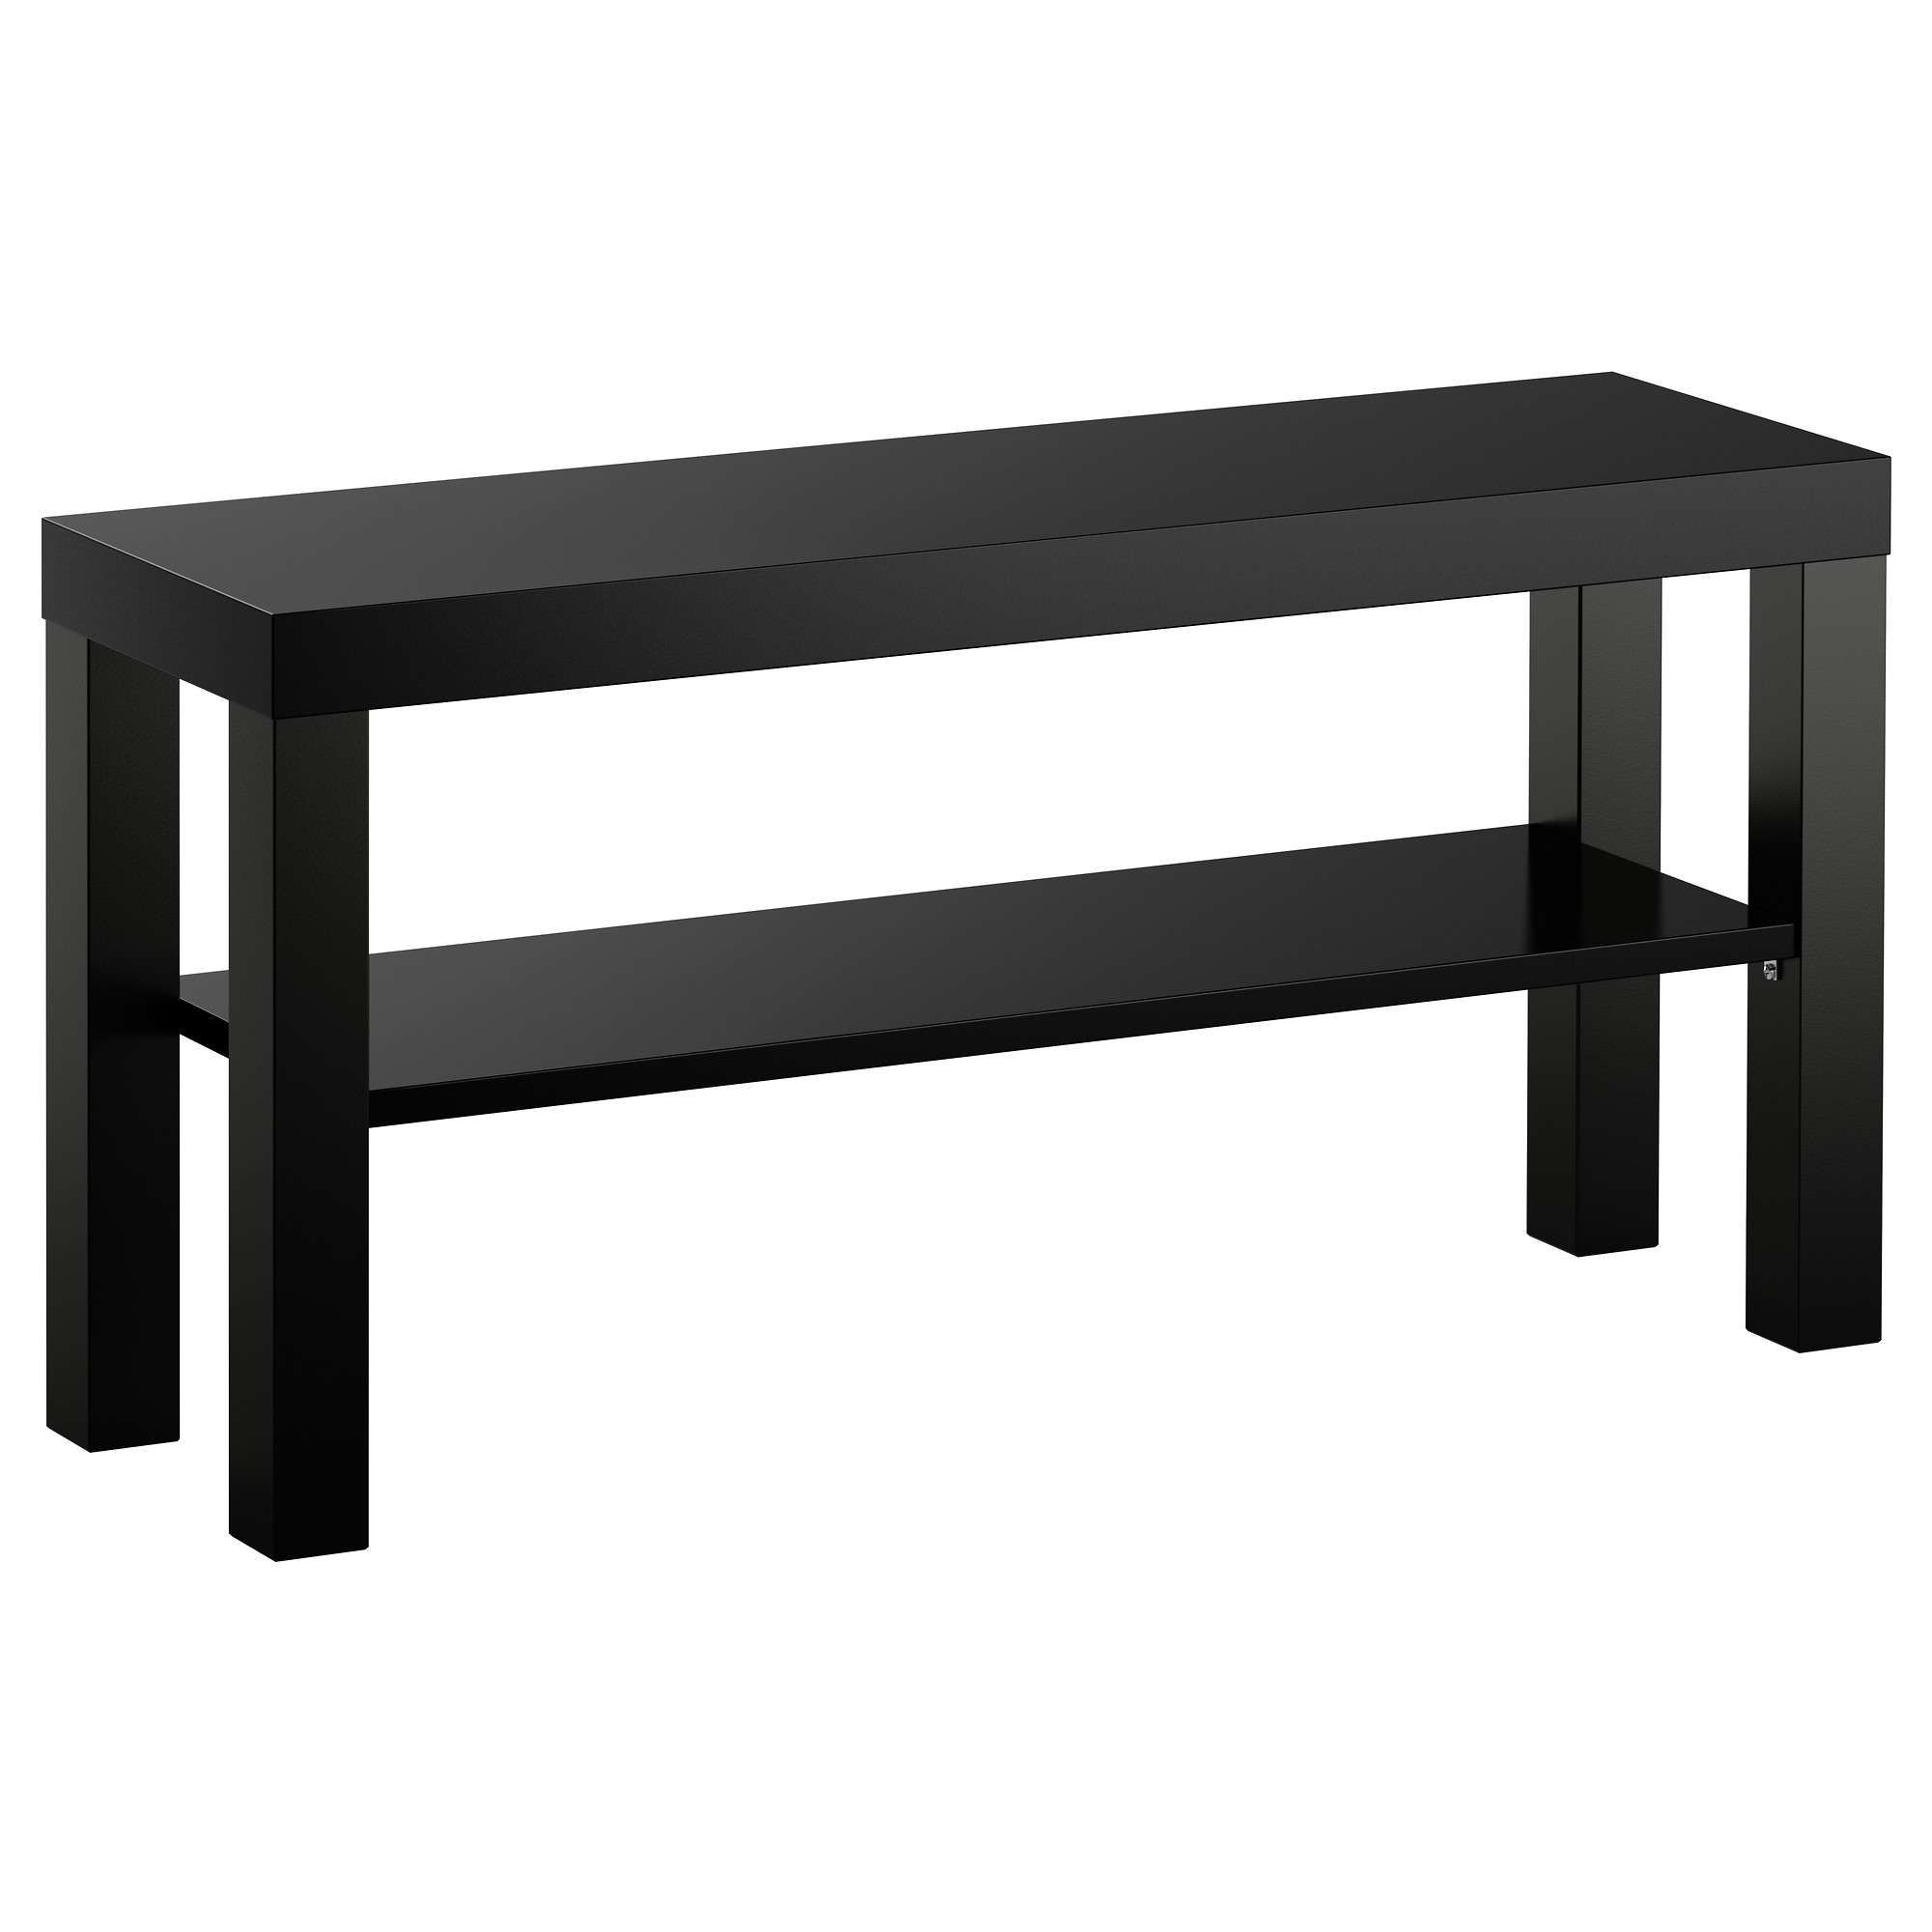 Tv Stands – Ikea For Skinny Tv Stands (View 11 of 15)